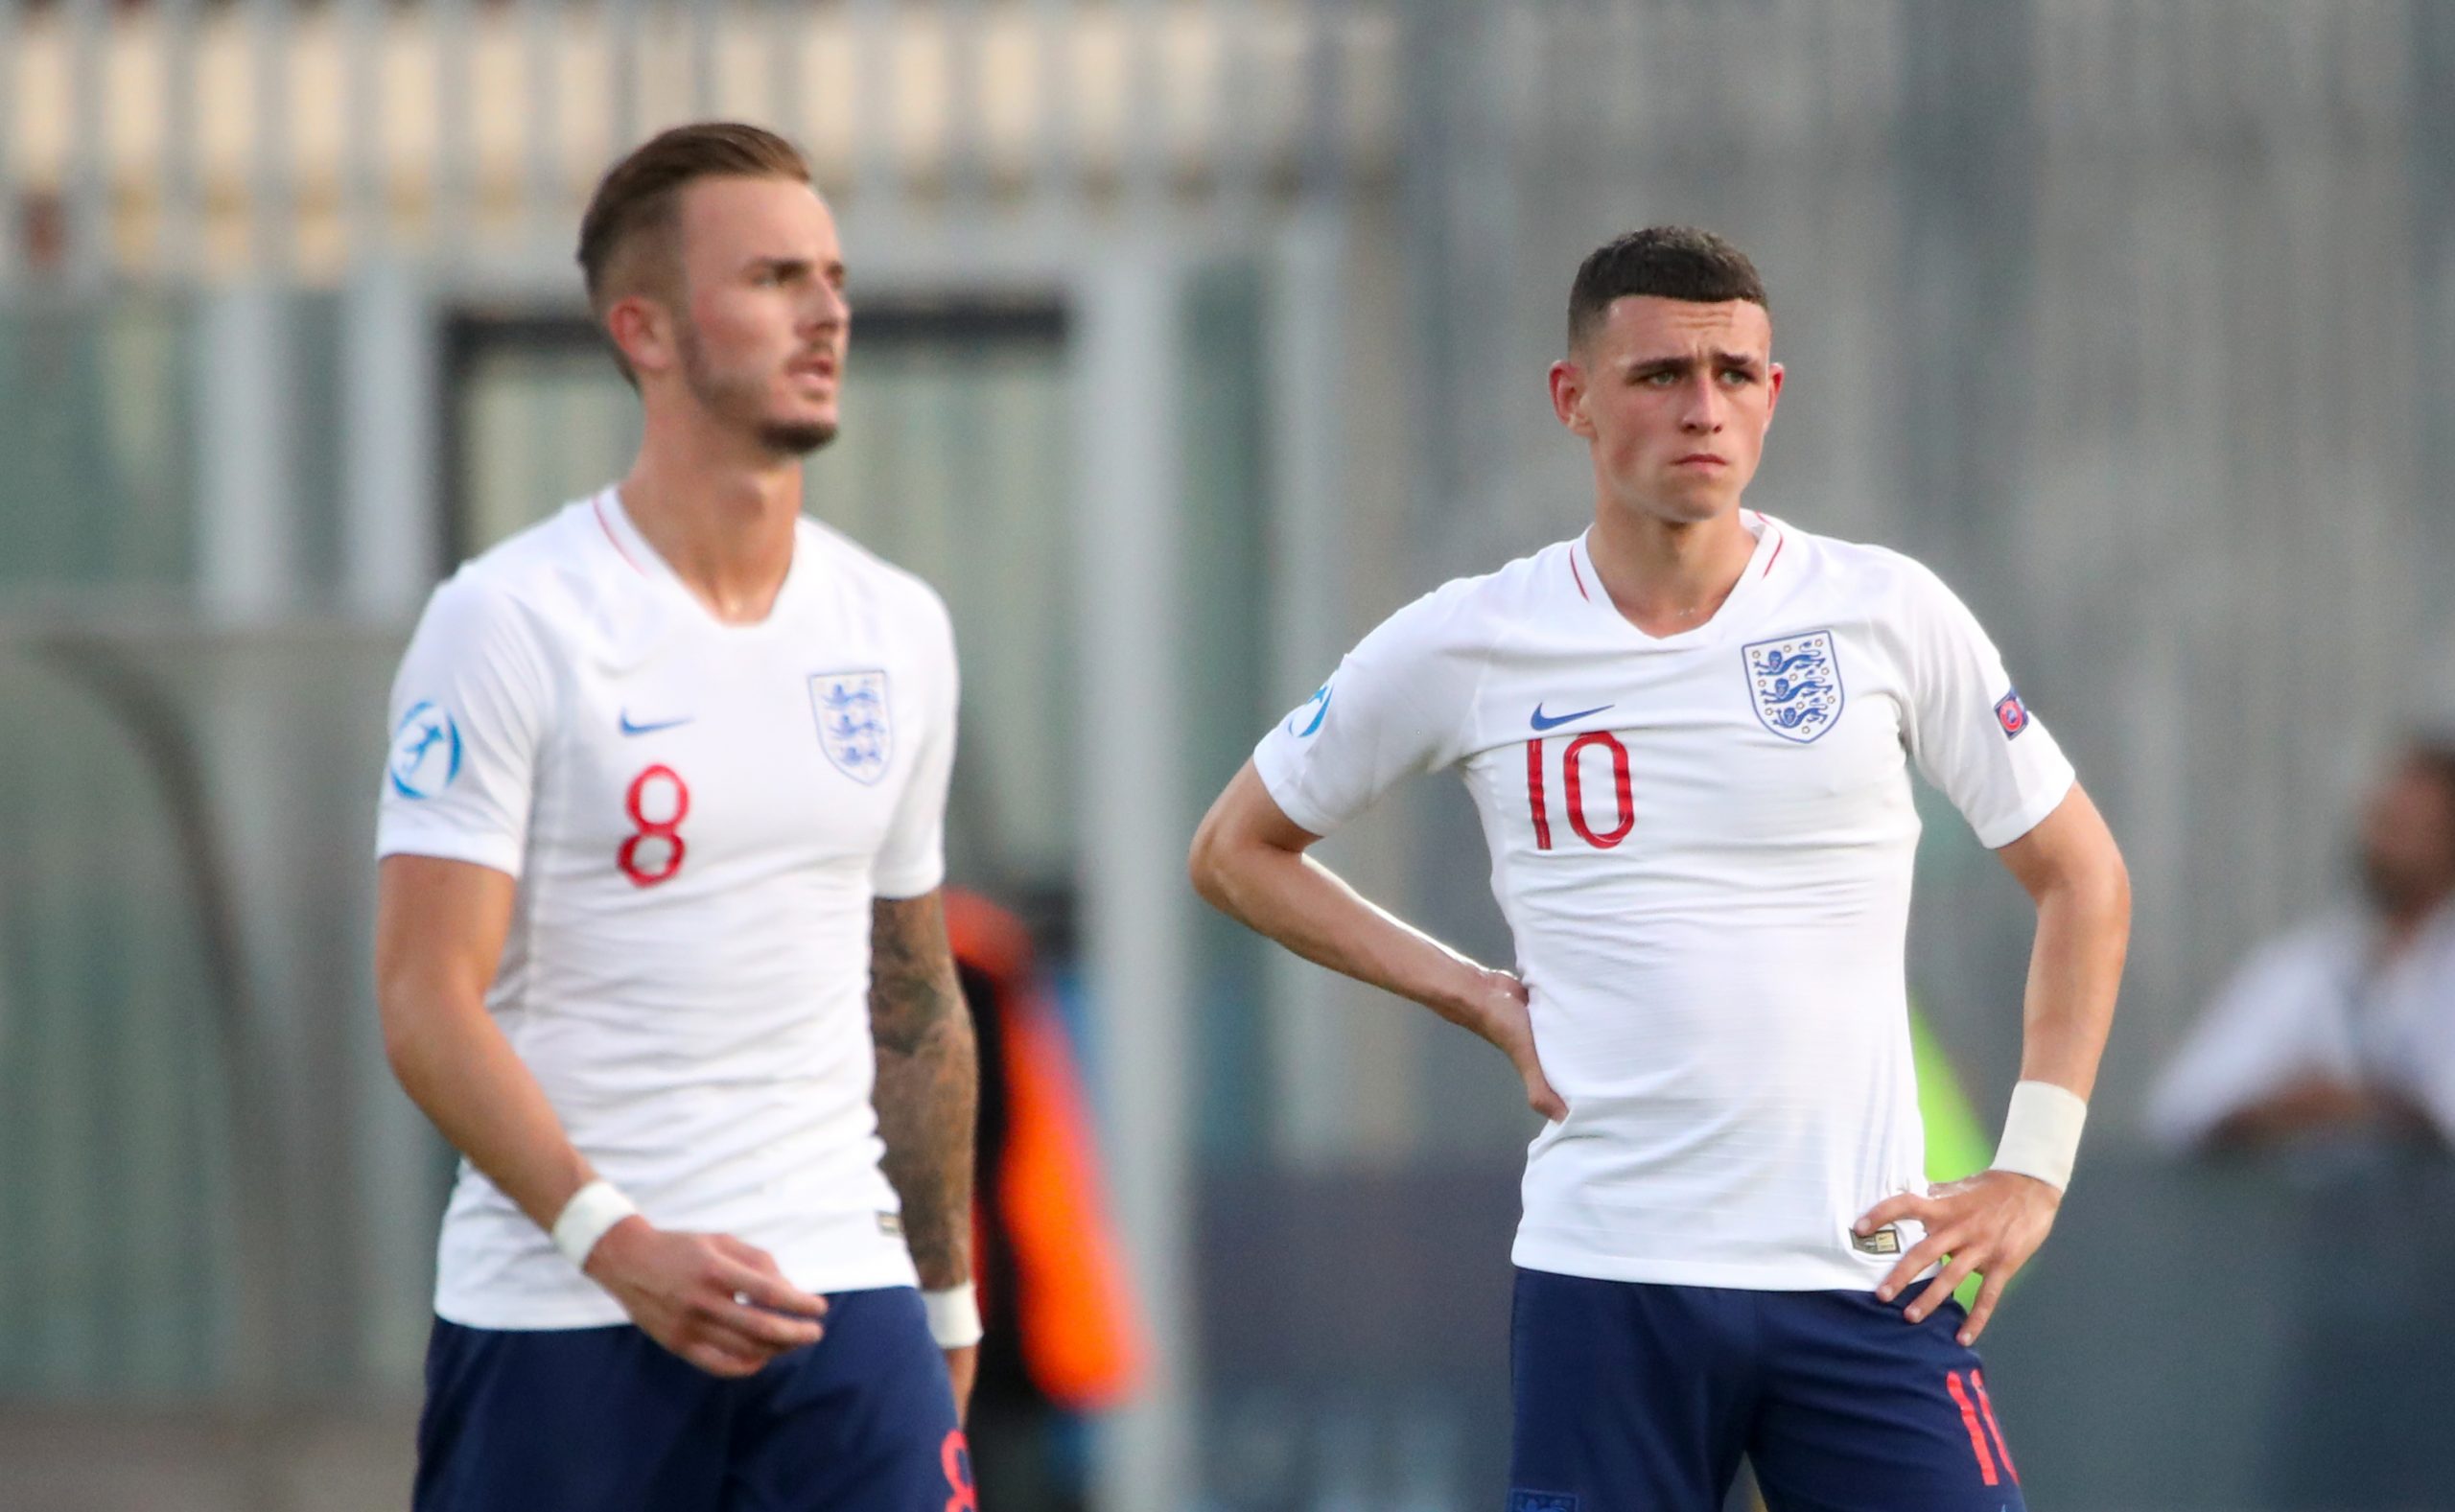 England Under-21s Had a Disastrous Euros. There Are Still Players Who Can Make the Step Up.